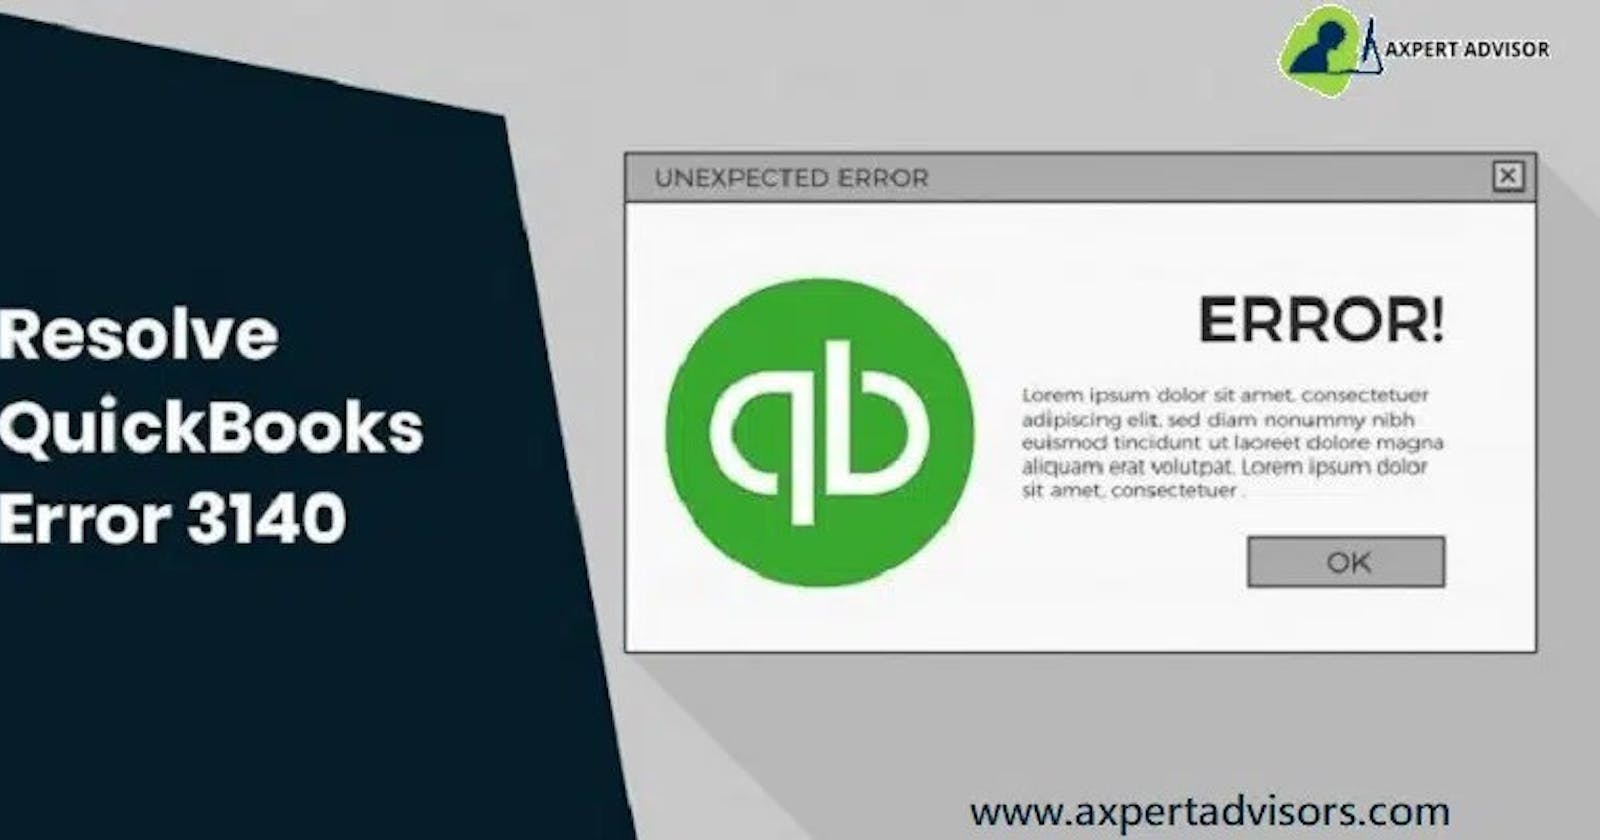 How to Fix QuickBooks Error 3140 While Adding an Invoice?